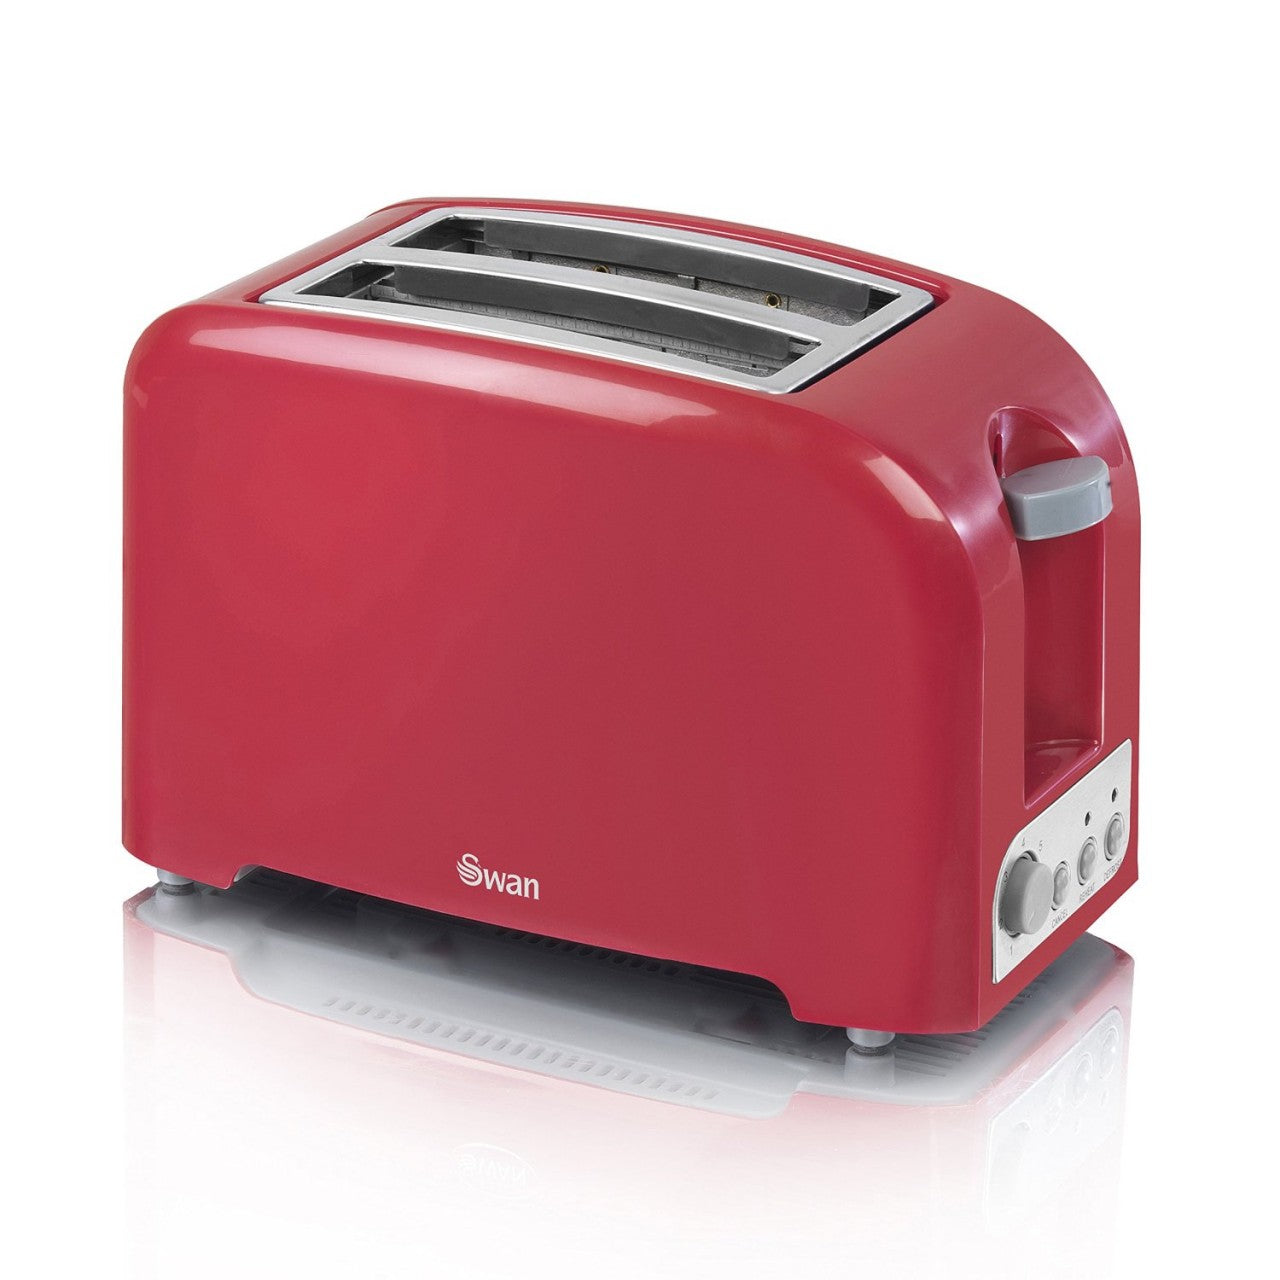 SWAN 2-Slice Toaster, Red